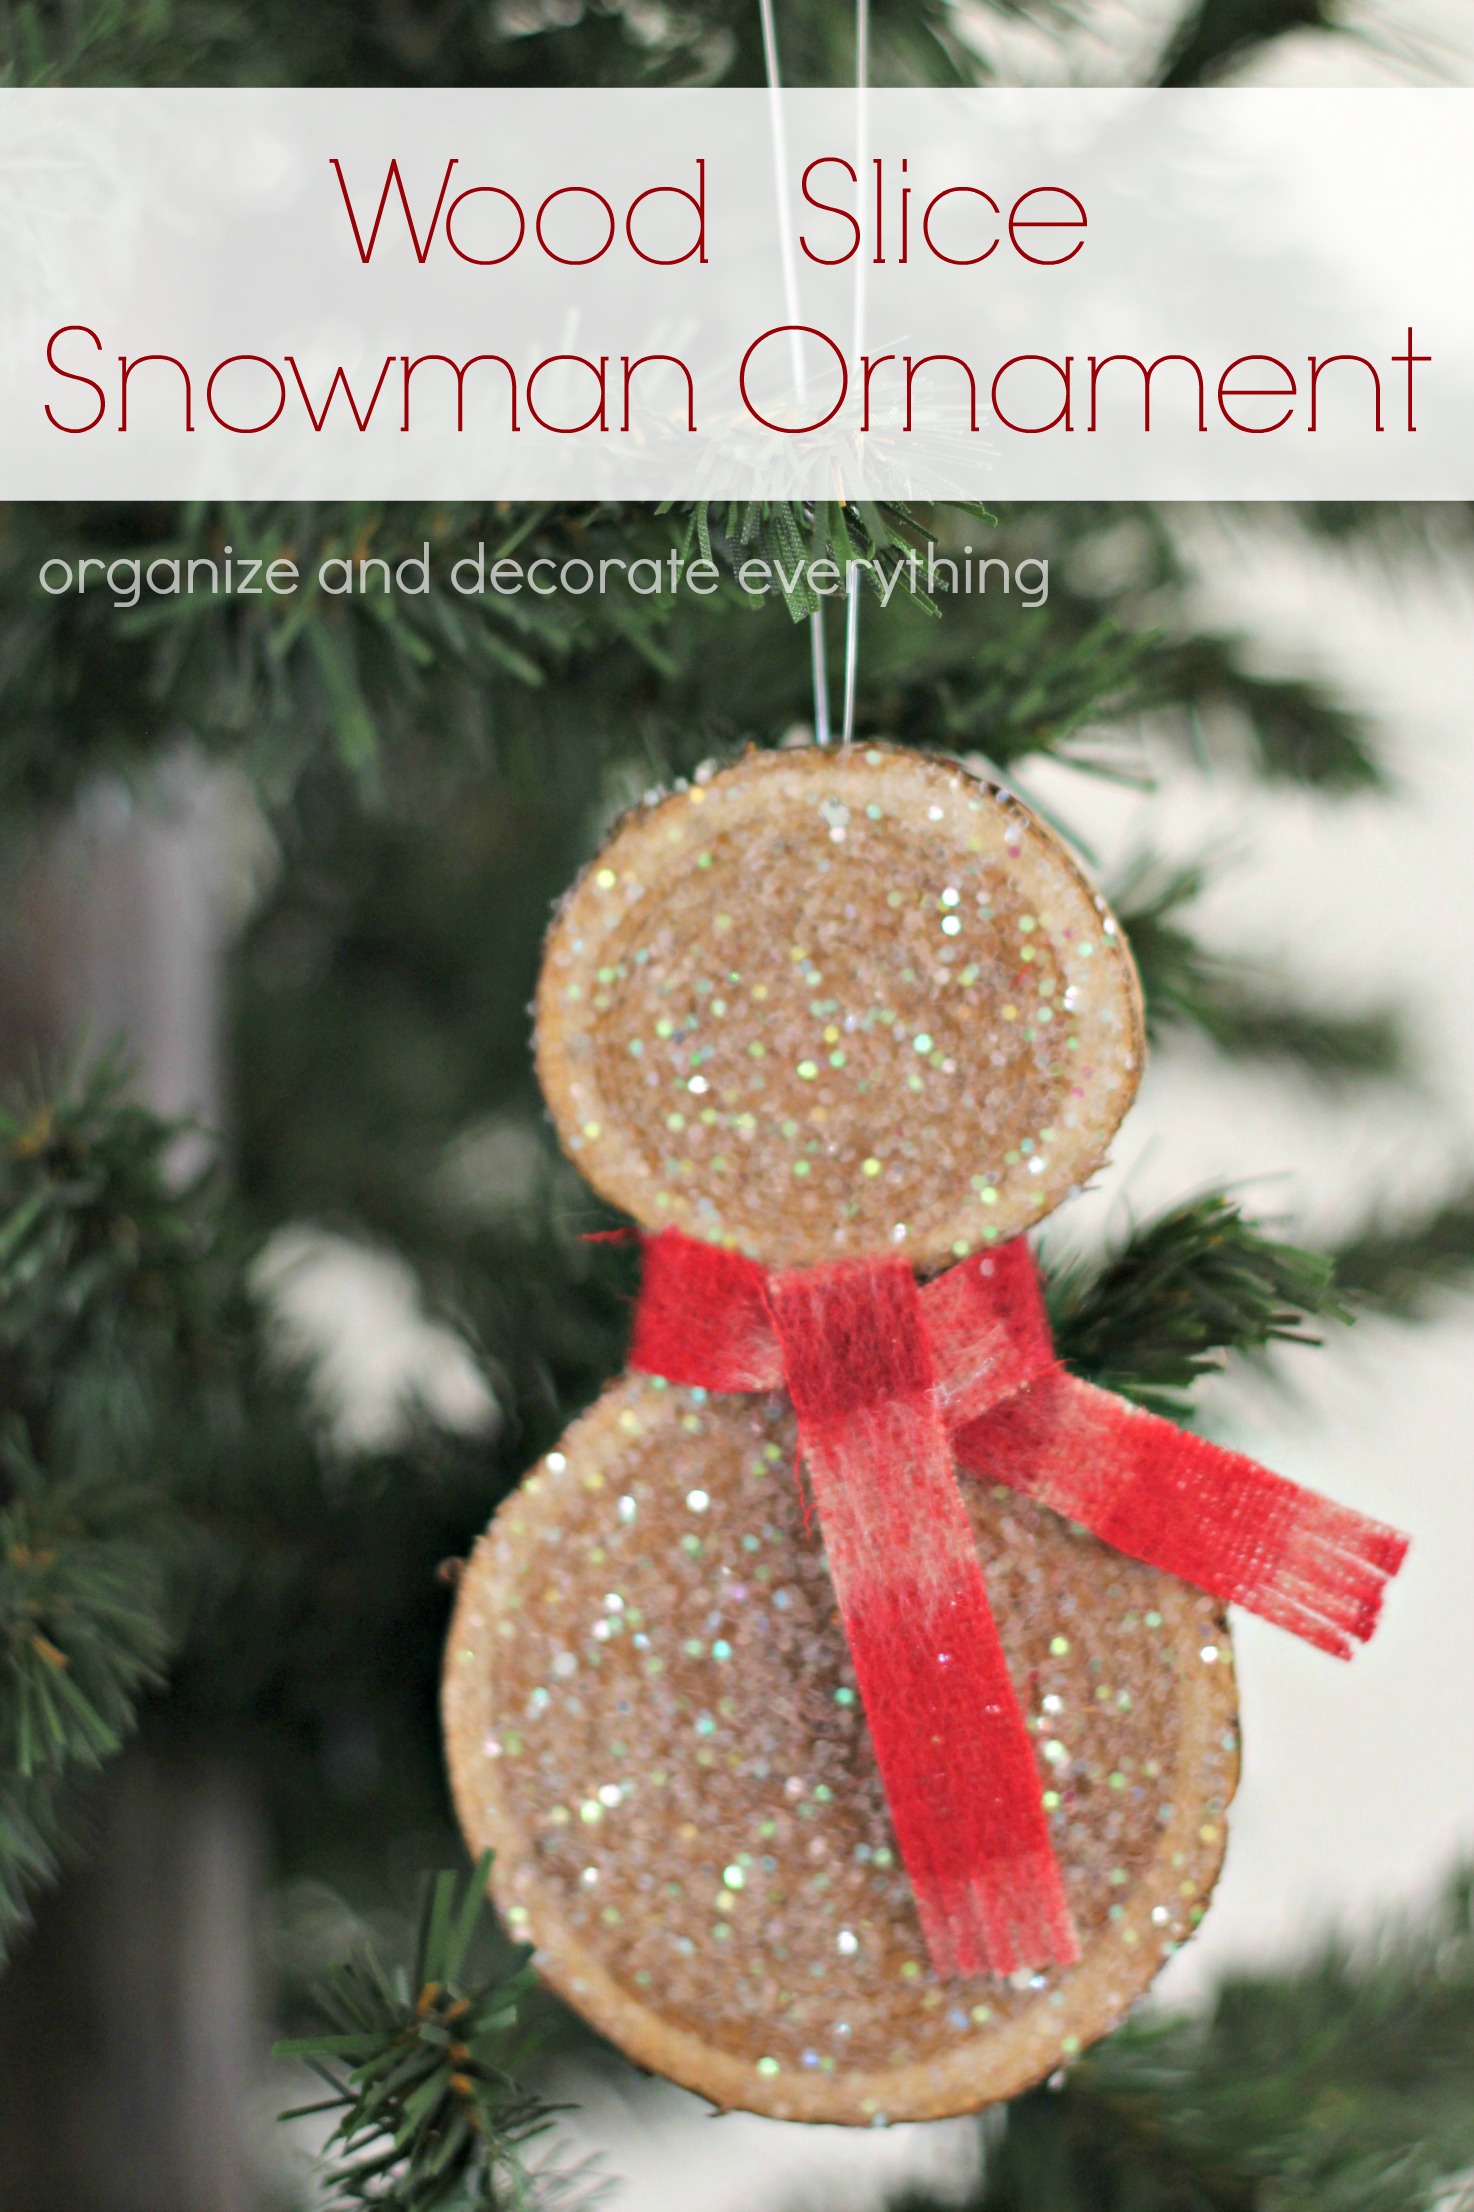 Wood Slice Snowman Ornament Organize And Decorate Everything